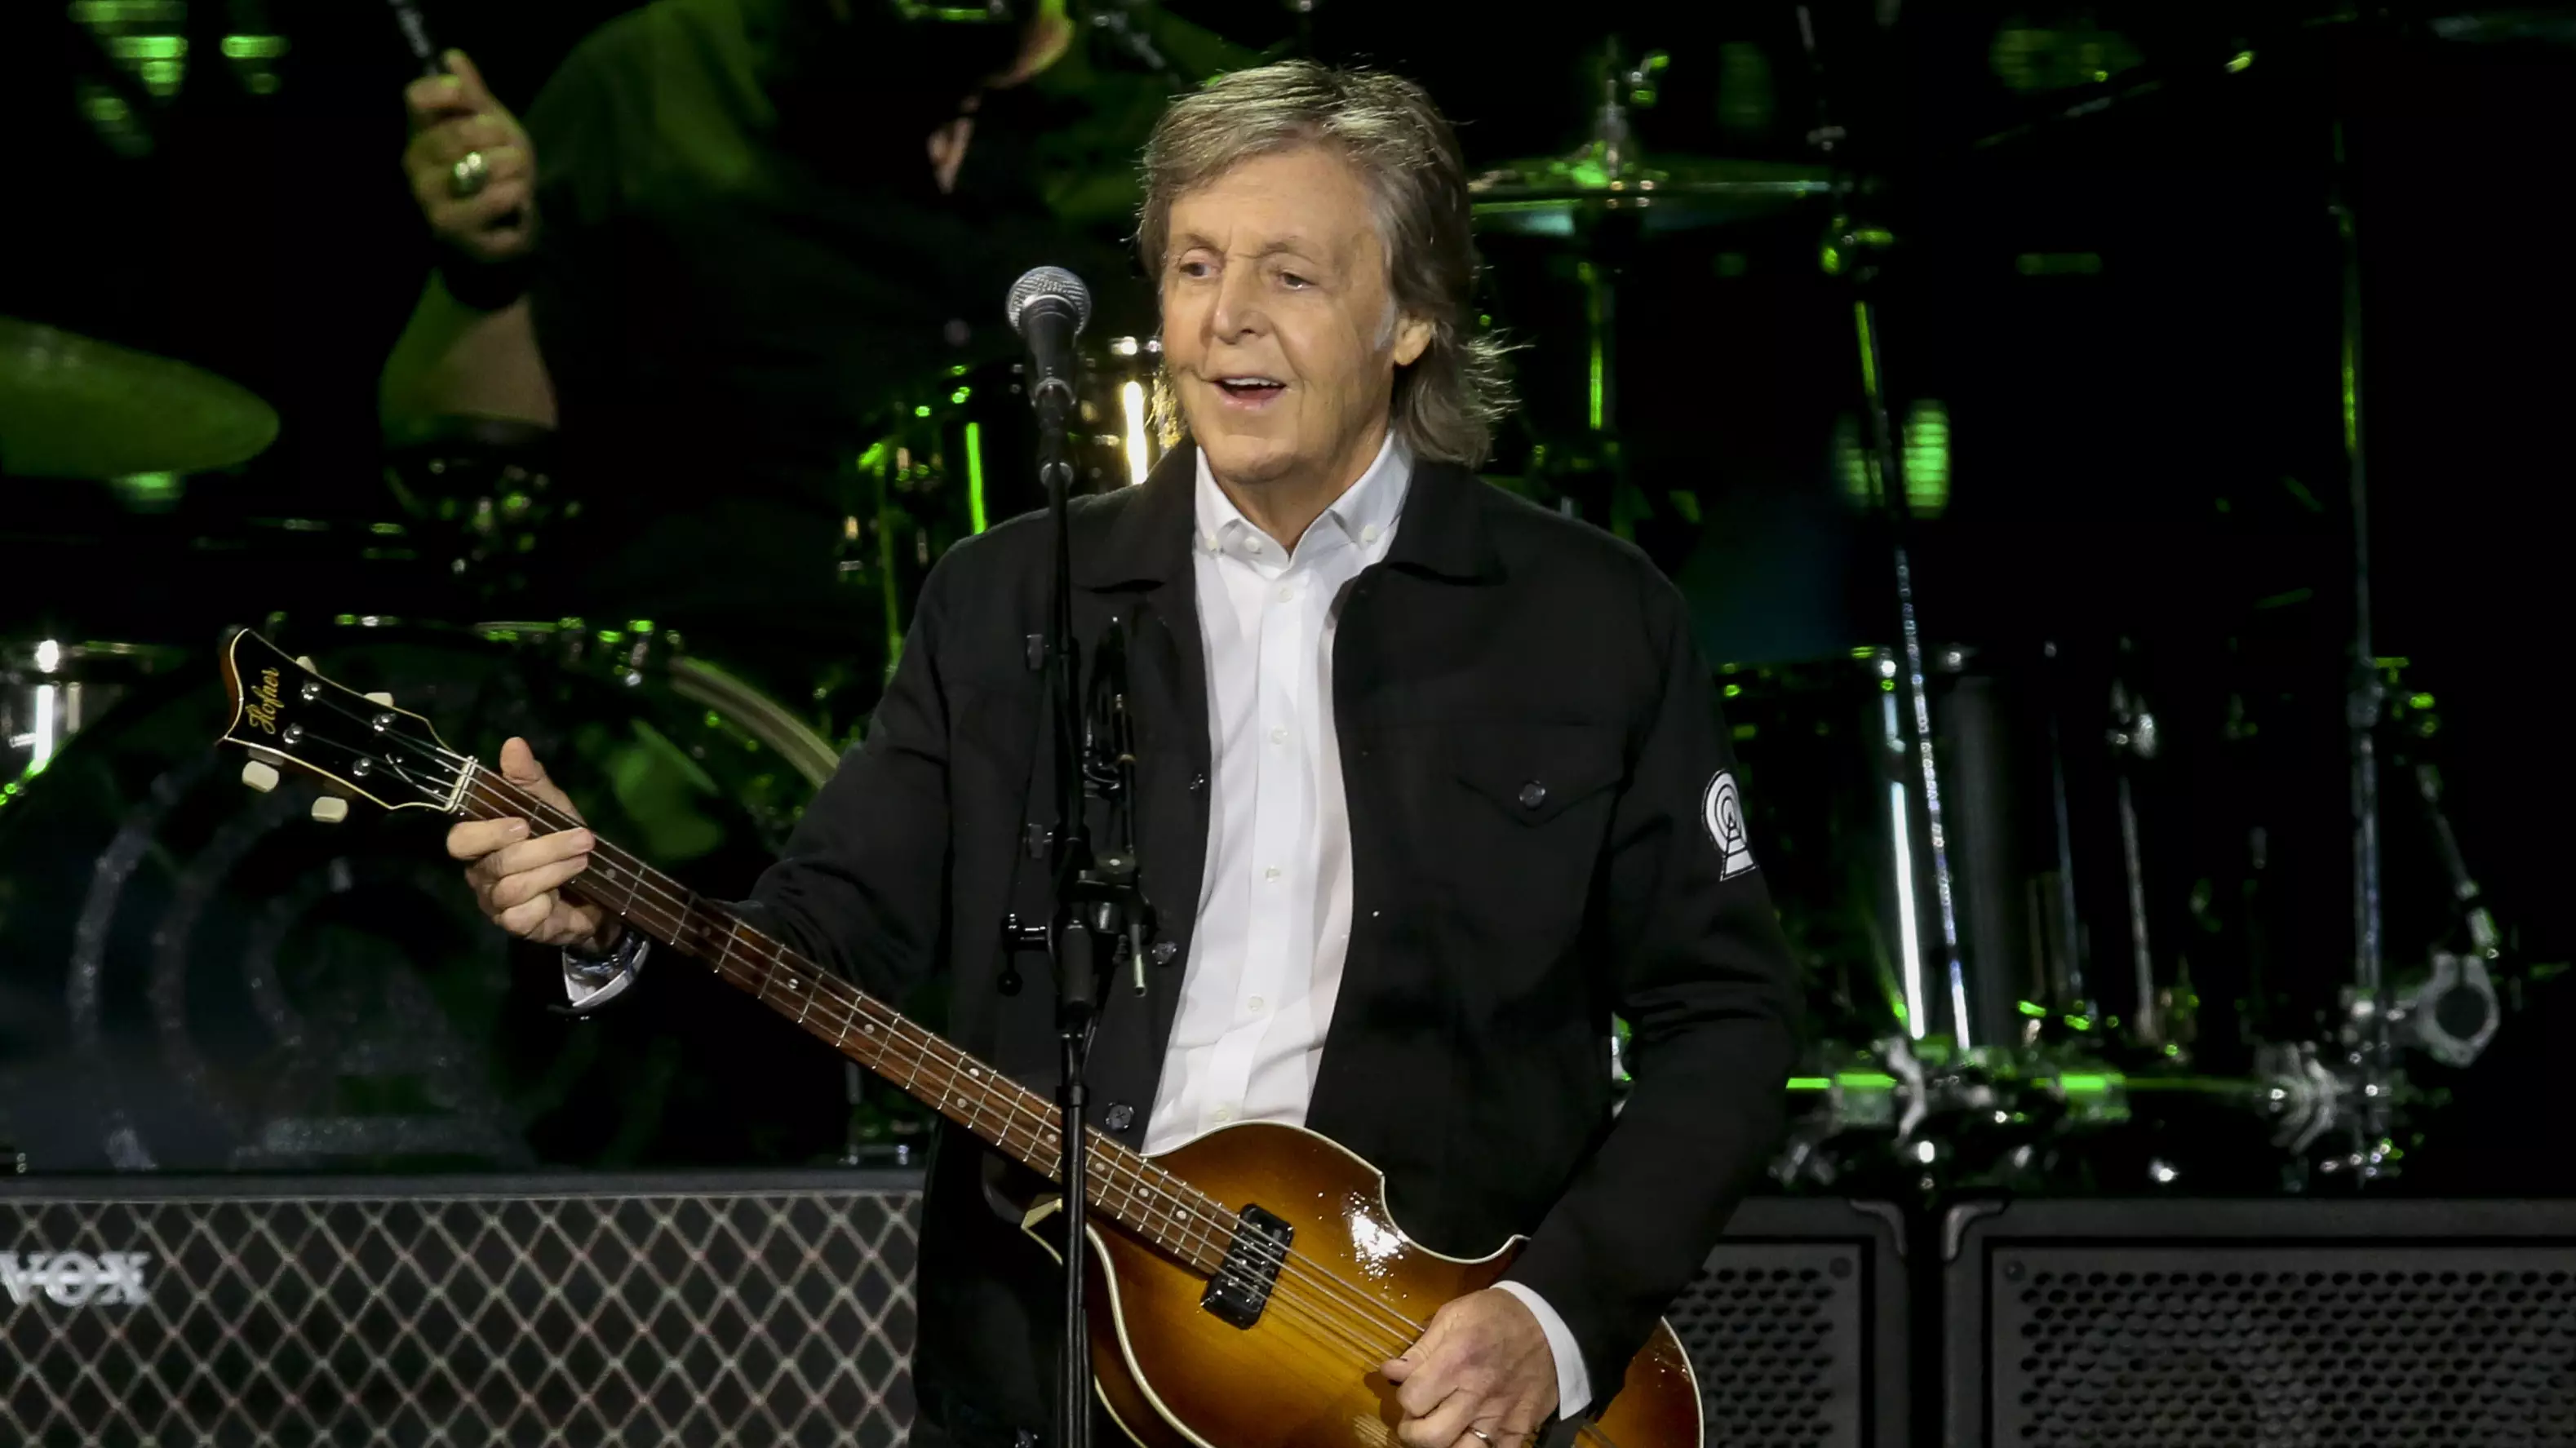 Sir Paul McCartney Admits To Using Autocue When Singing Because He's 'Thinking About Food'